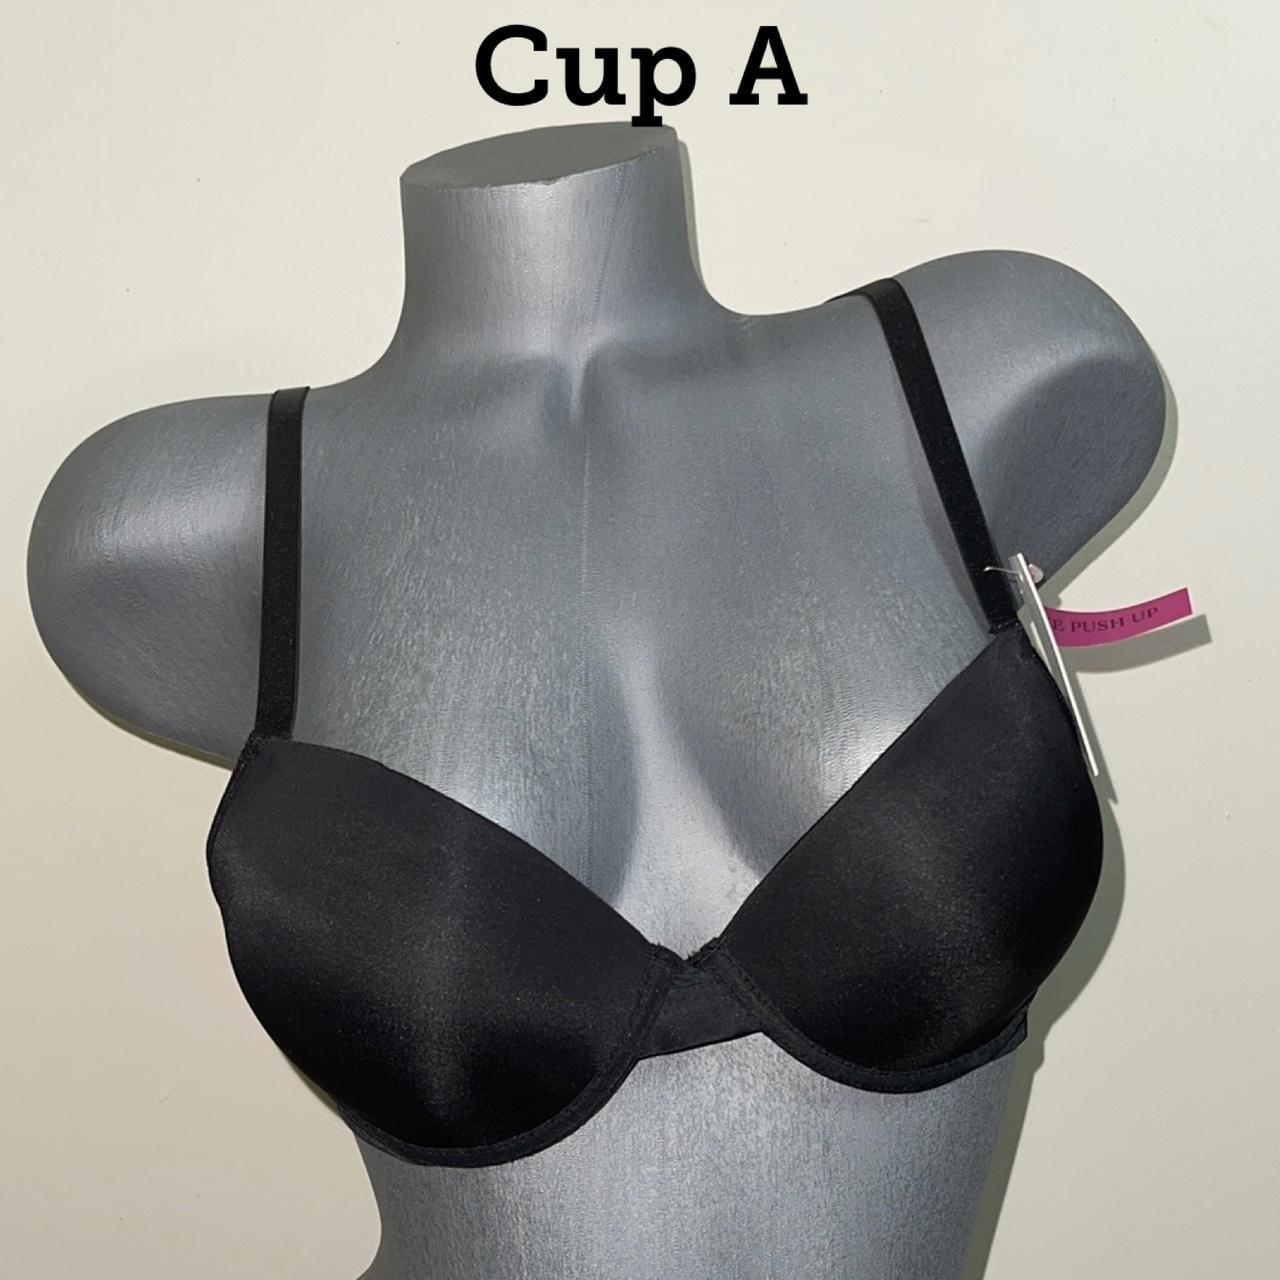 Next 2pack full cup bras size 34b these are new with - Depop